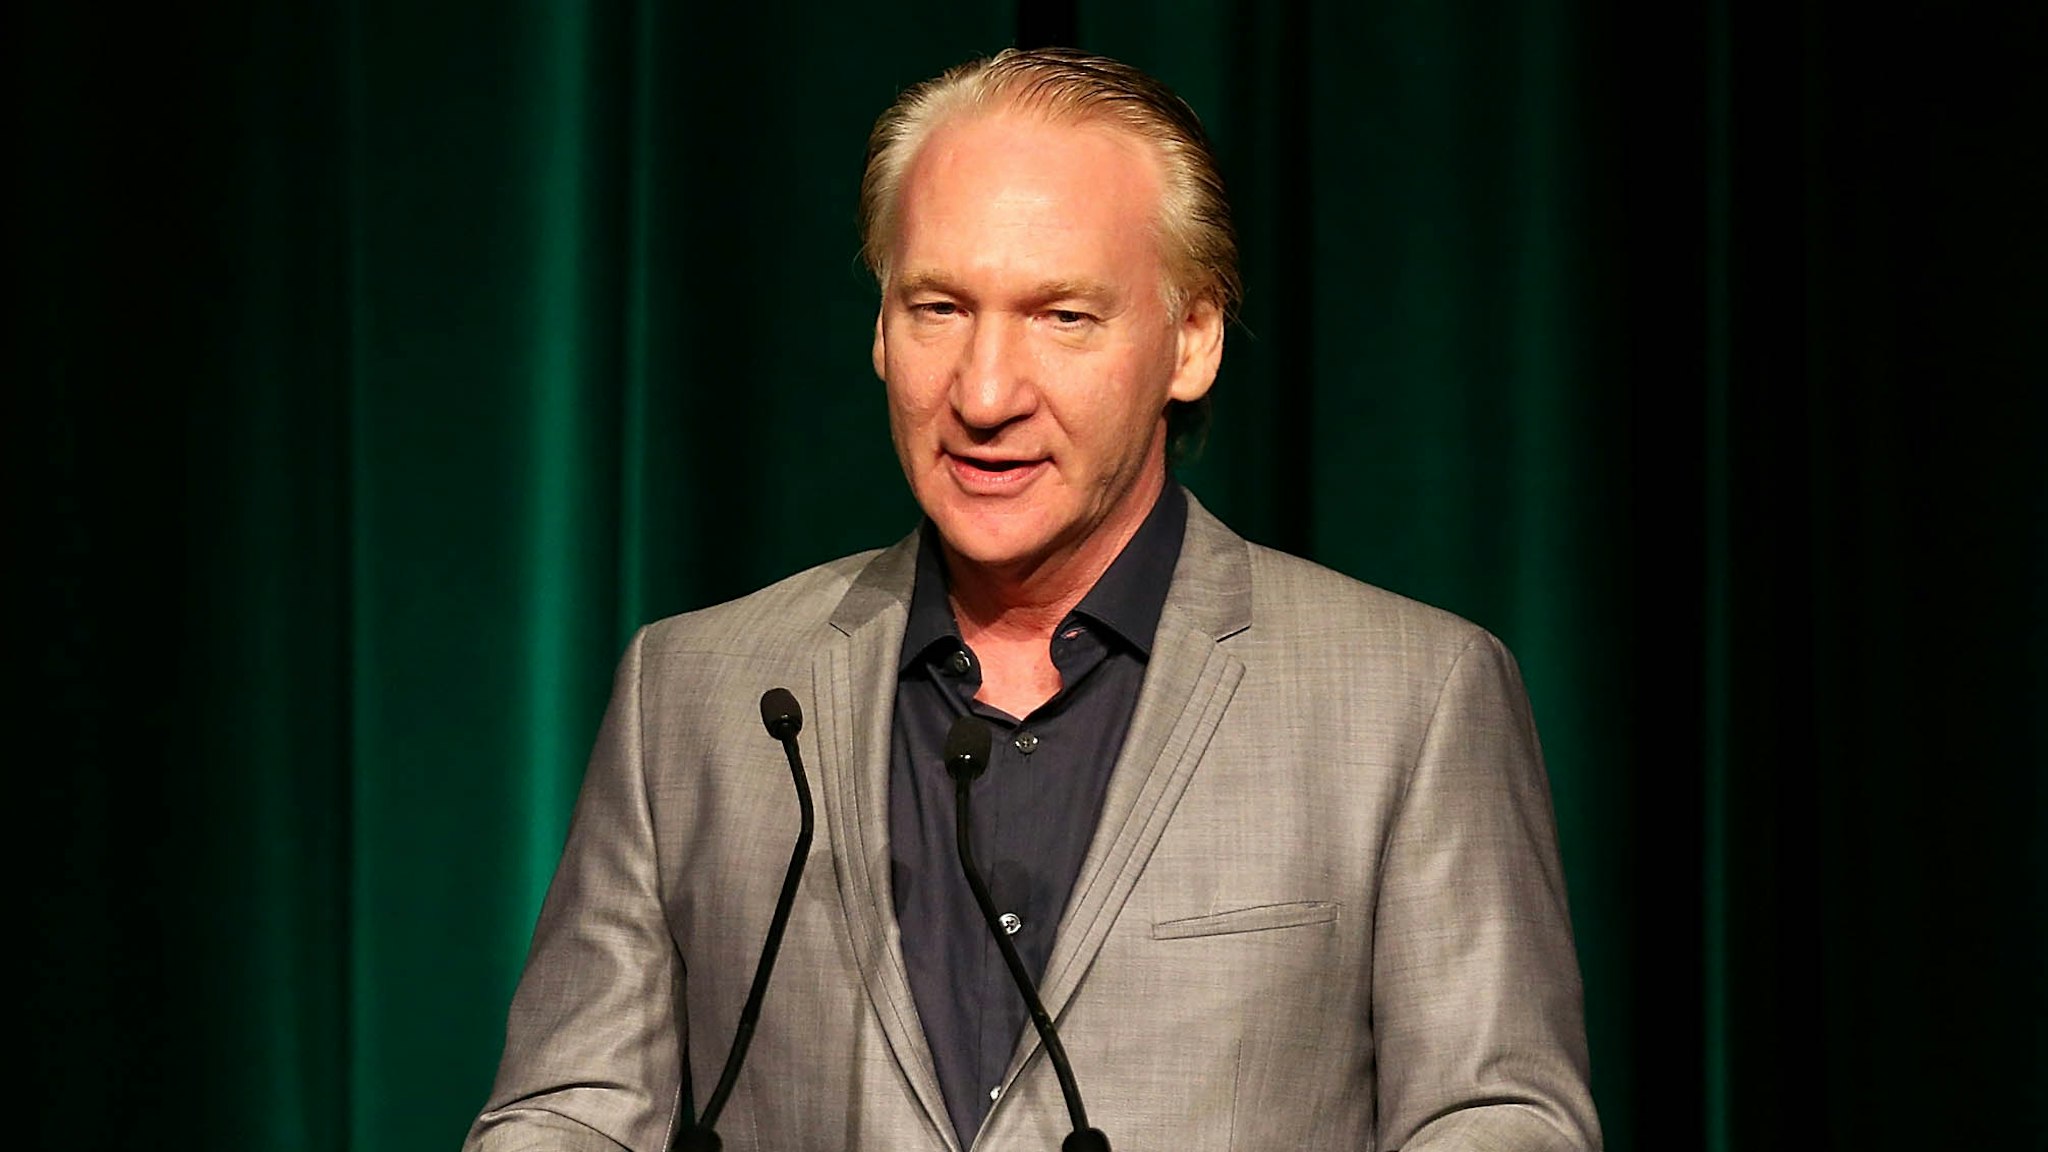 BEVERLY HILLS, CA - SEPTEMBER 28: Bill Maher speaks onstage while accepting the First Amendment Award during PEN Center USA's 26th Annual Literary Awards Festival honoring Isabel Allende at the Beverly Wilshire Four Seasons Hotel on September 28, 2016 in Beverly Hills, California.